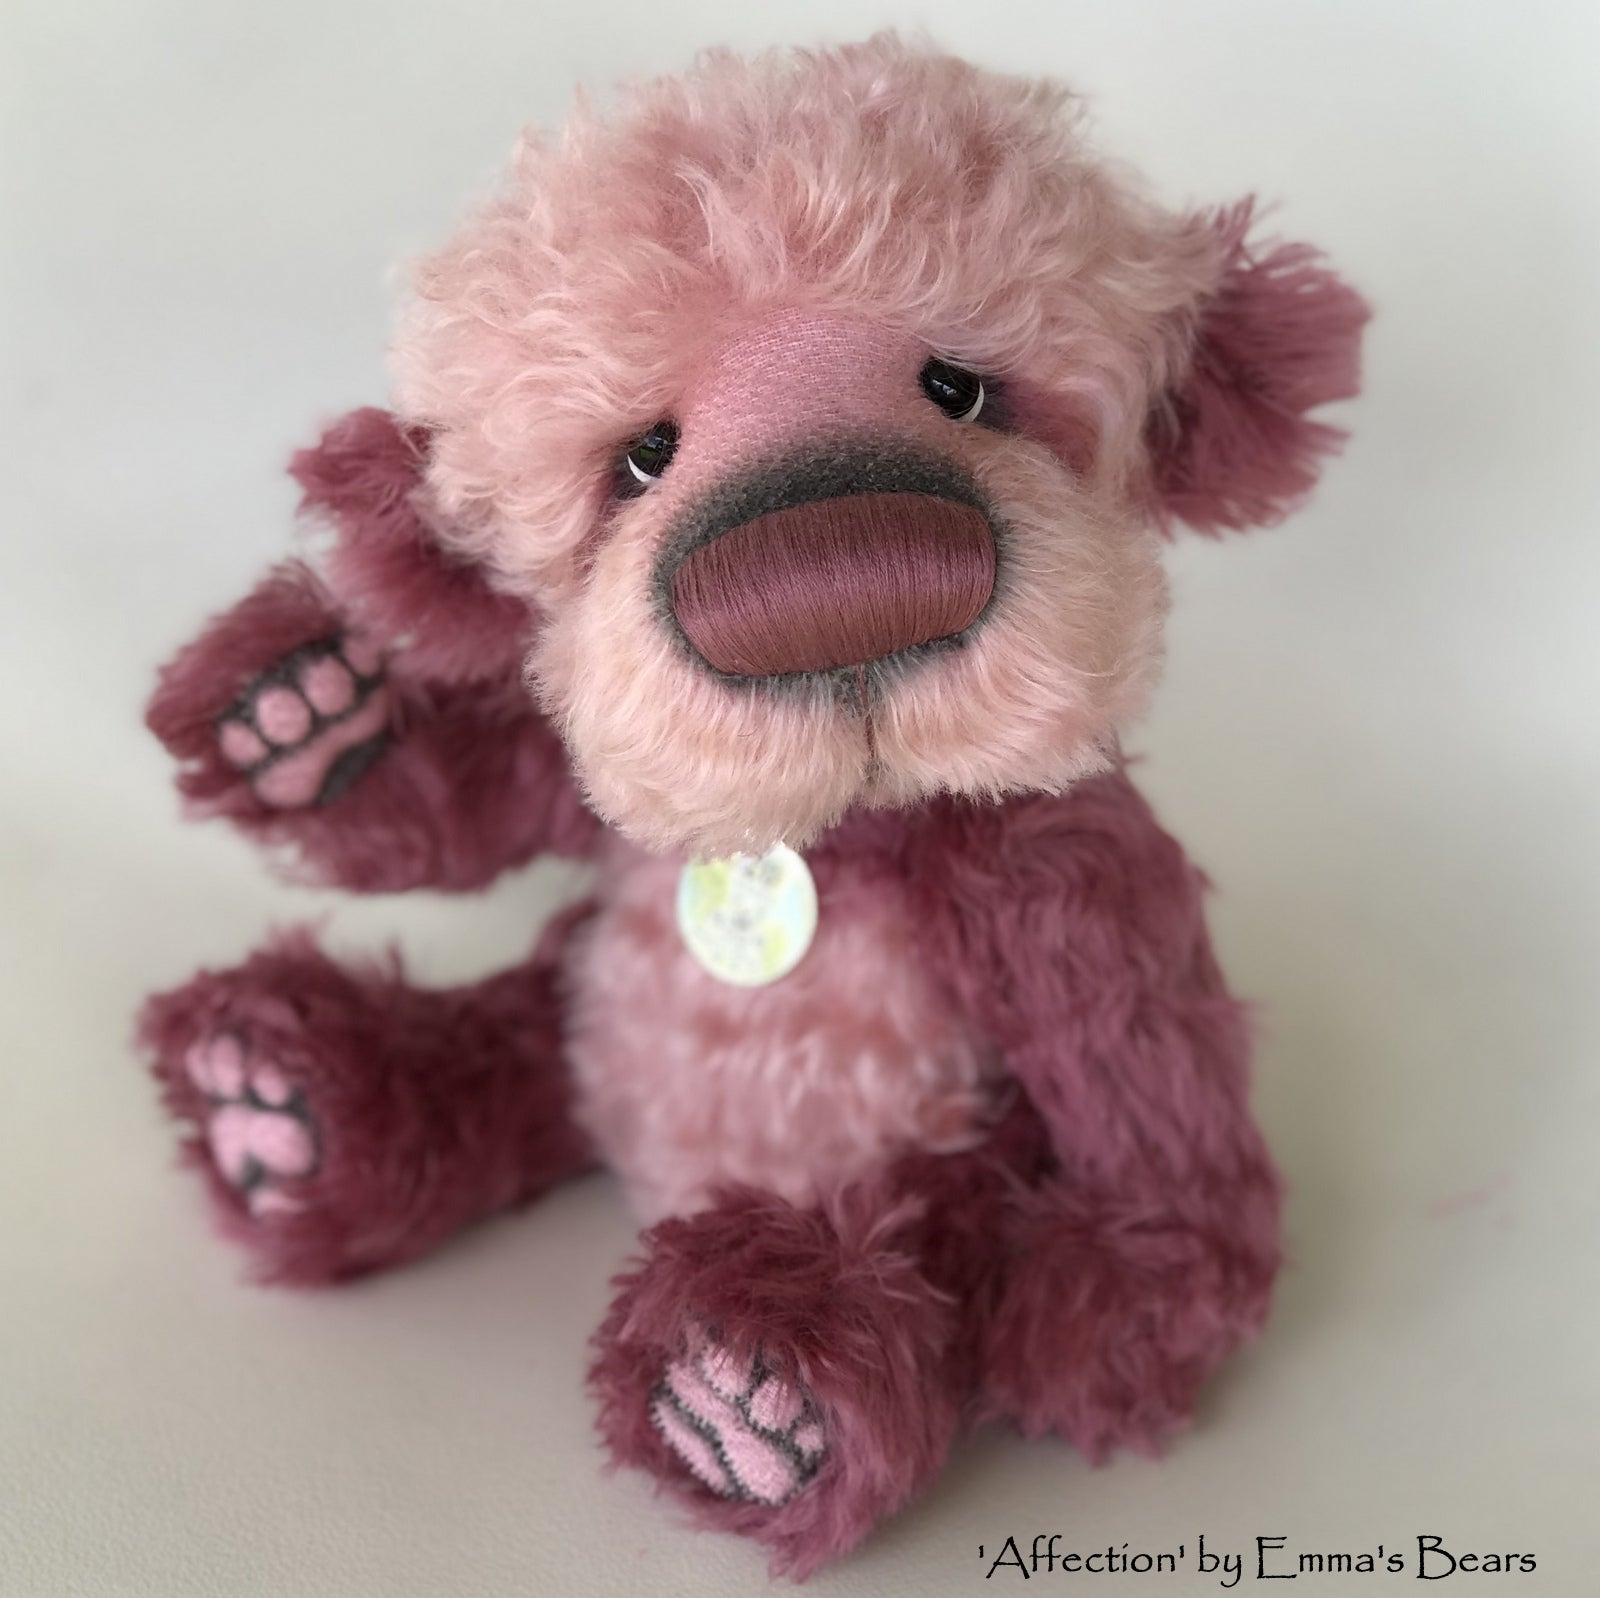 Affection - 20 Years of Emma's Bears Commemorative Teddy - OOAK in a series